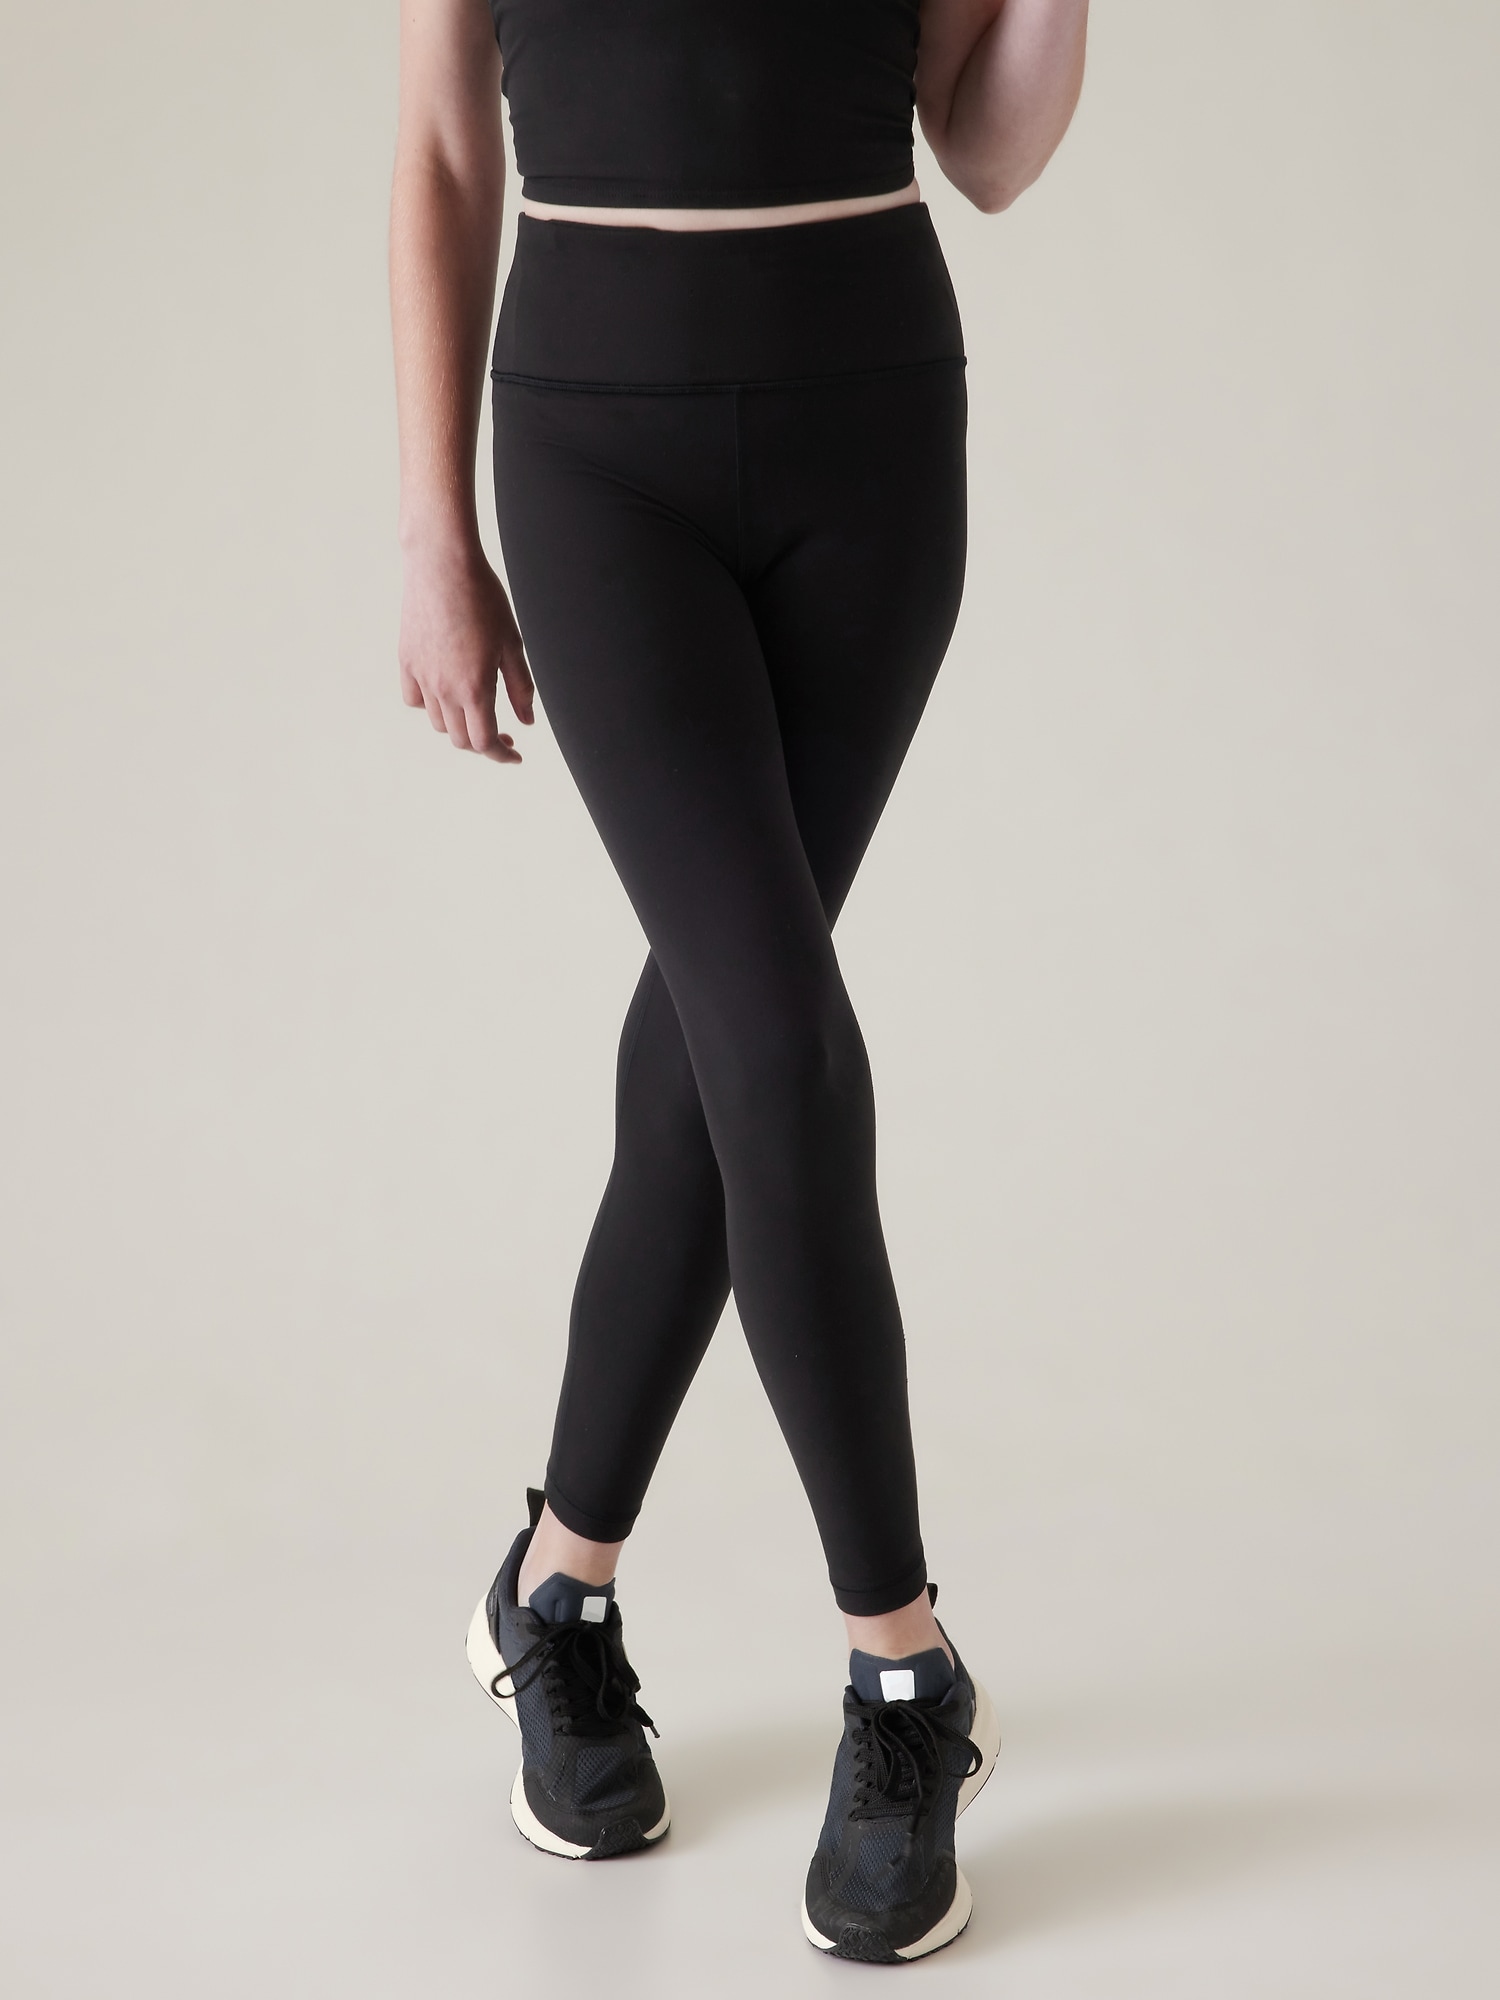 Exceptionally Stylish Girls in Super Tight Leggings at Low Prices